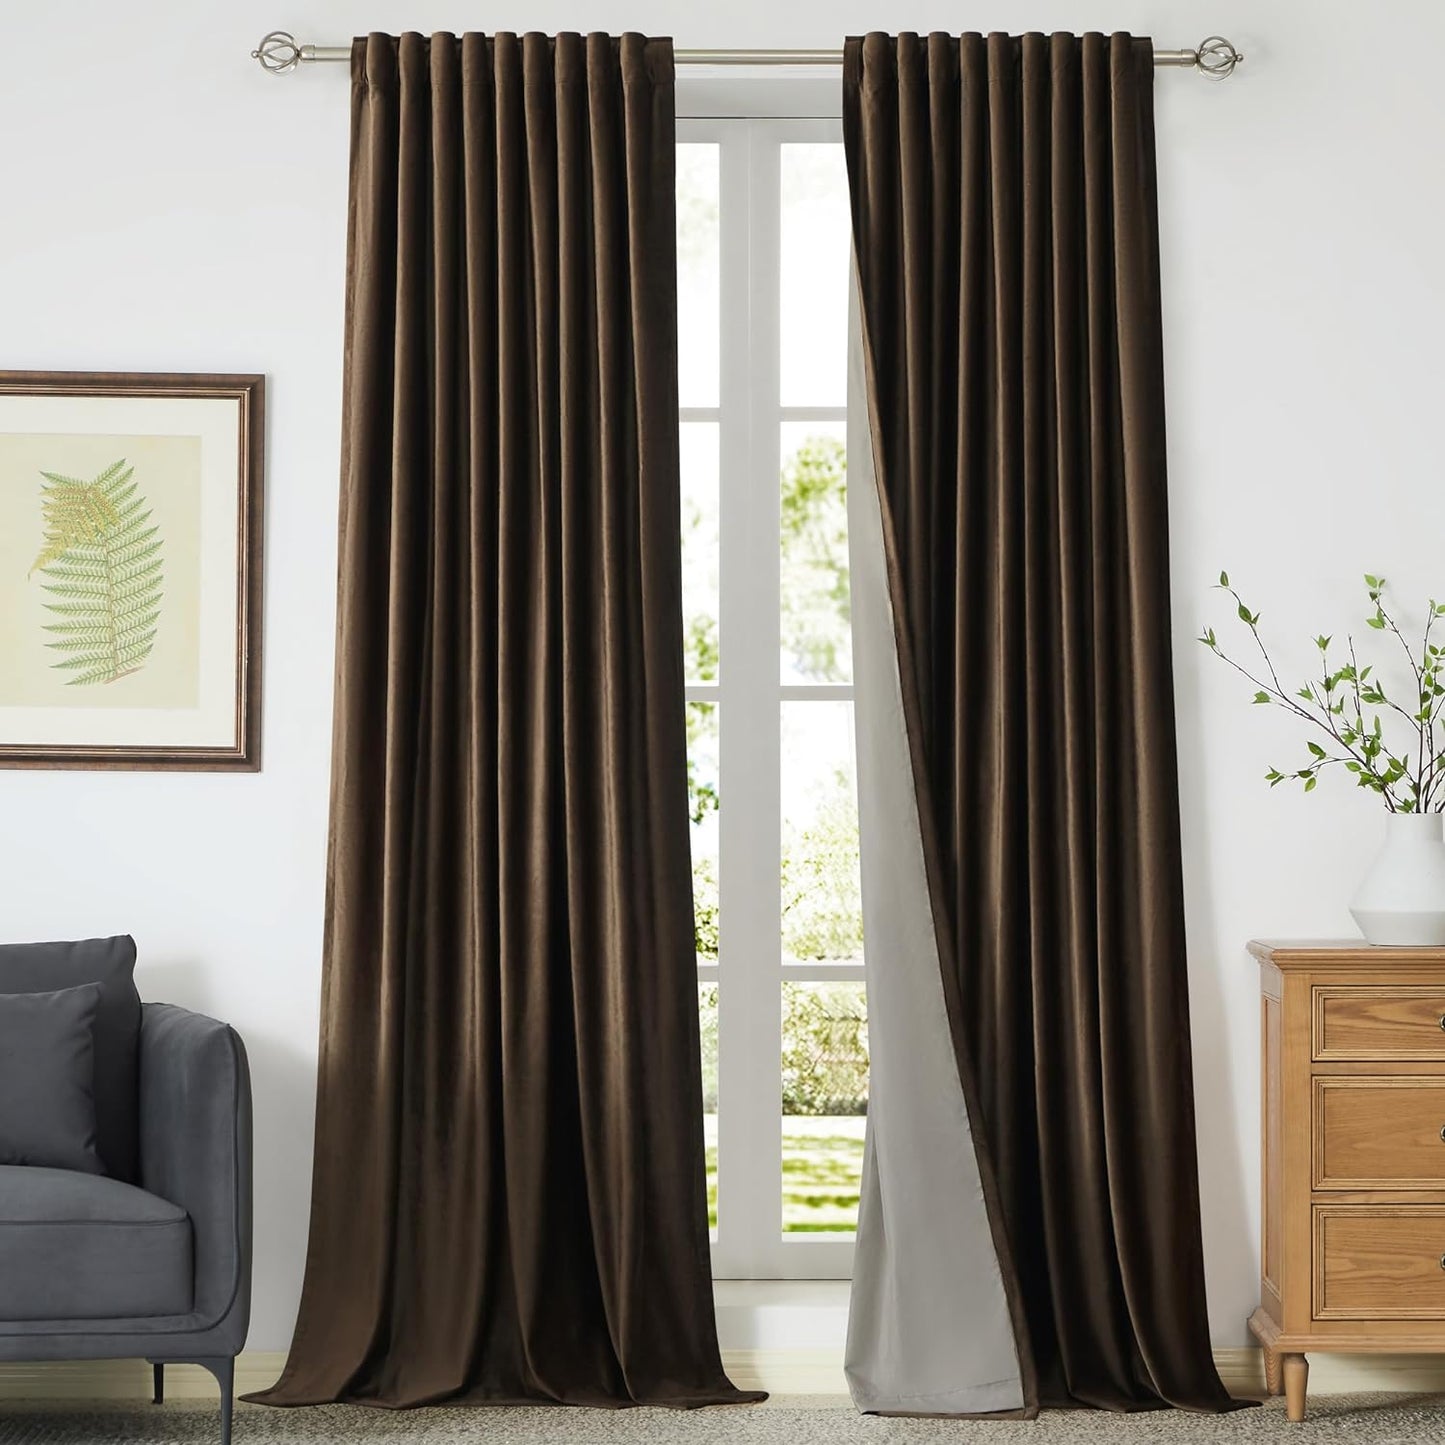 100% Blackout Ivory off White Velvet Curtains 108 Inch Long for Living Room,Set of 2 Panels Liner Rod Pocket Back Tab Thermal Window Drapes Room Darkening Heavy Decorative Curtains for Bedroom  PRIMROSE Brown 52X96 Inches 